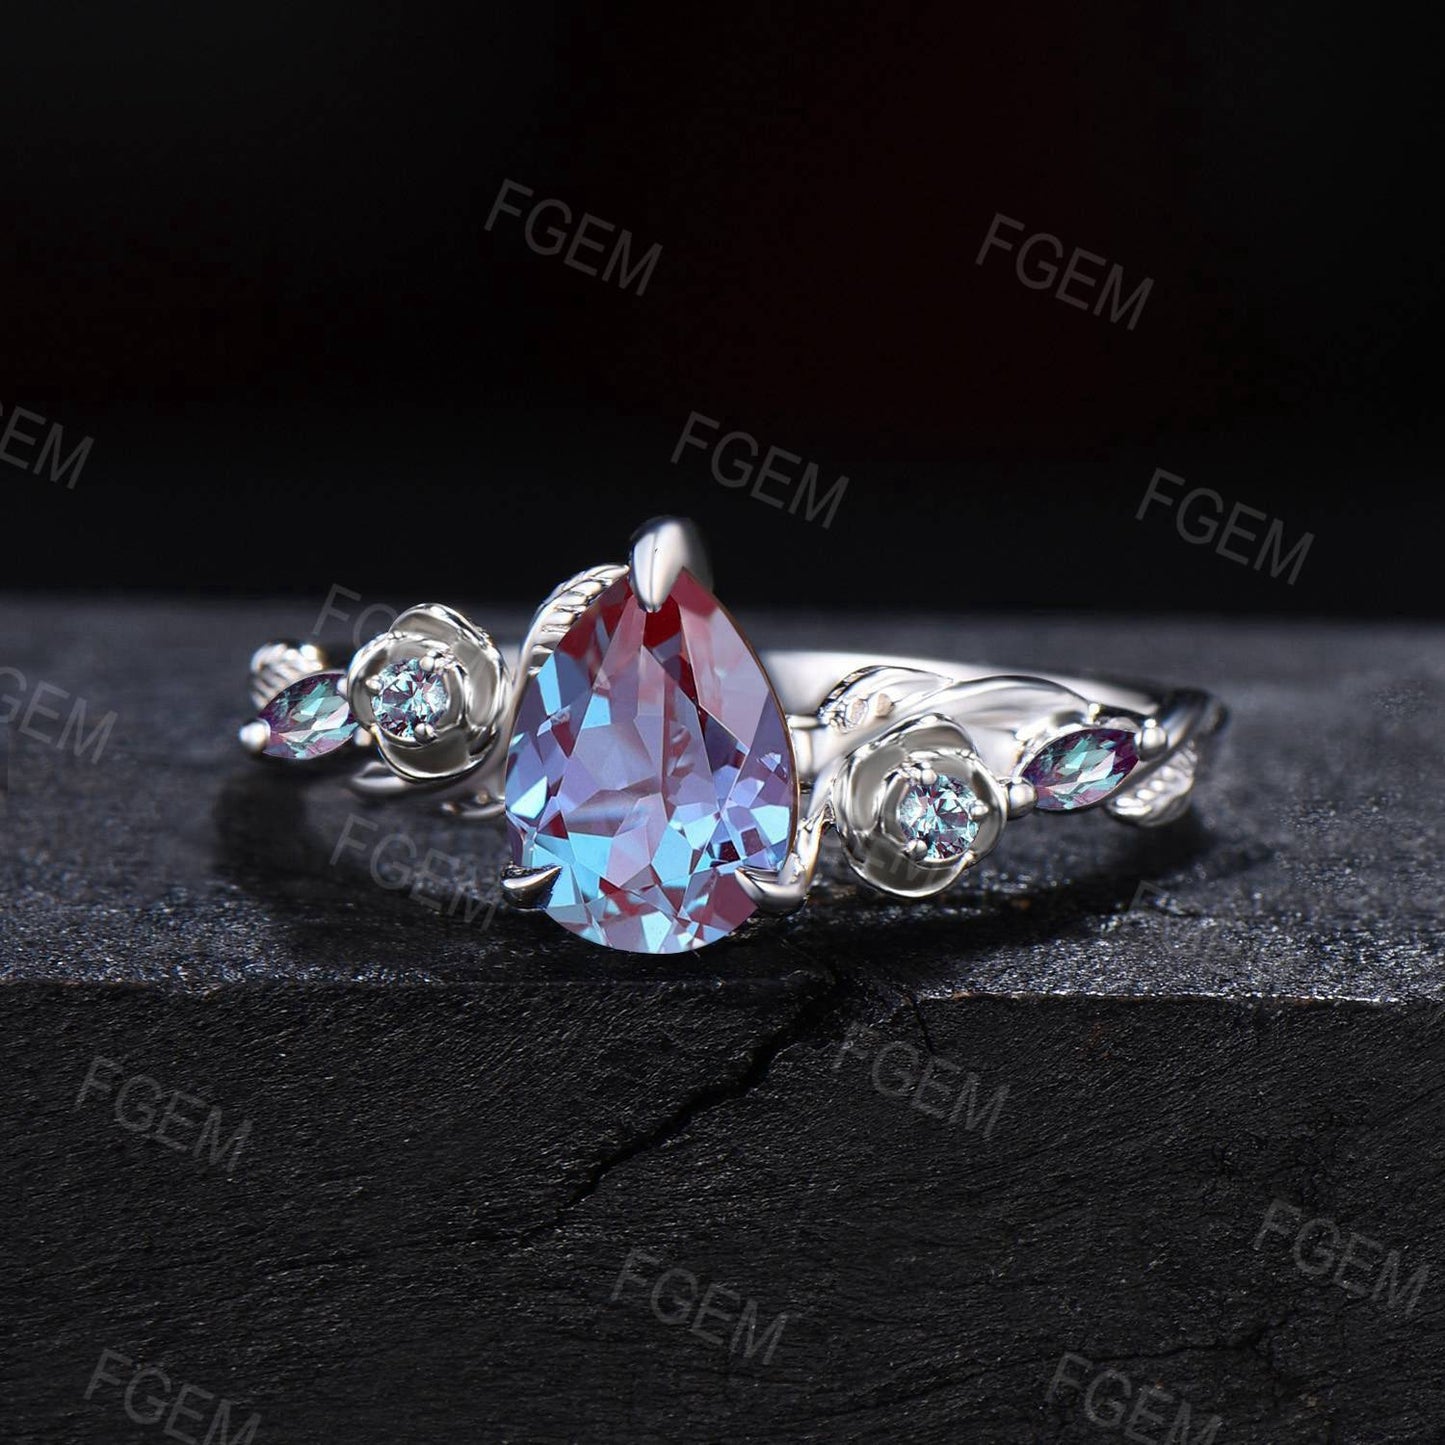 Rose Flower Alexandrite Rings 1.25ct Twig Vine Branch Nature Inspired Teardrop Cut Alexandrite Engagement Ring Unique June Birthstone Gifts